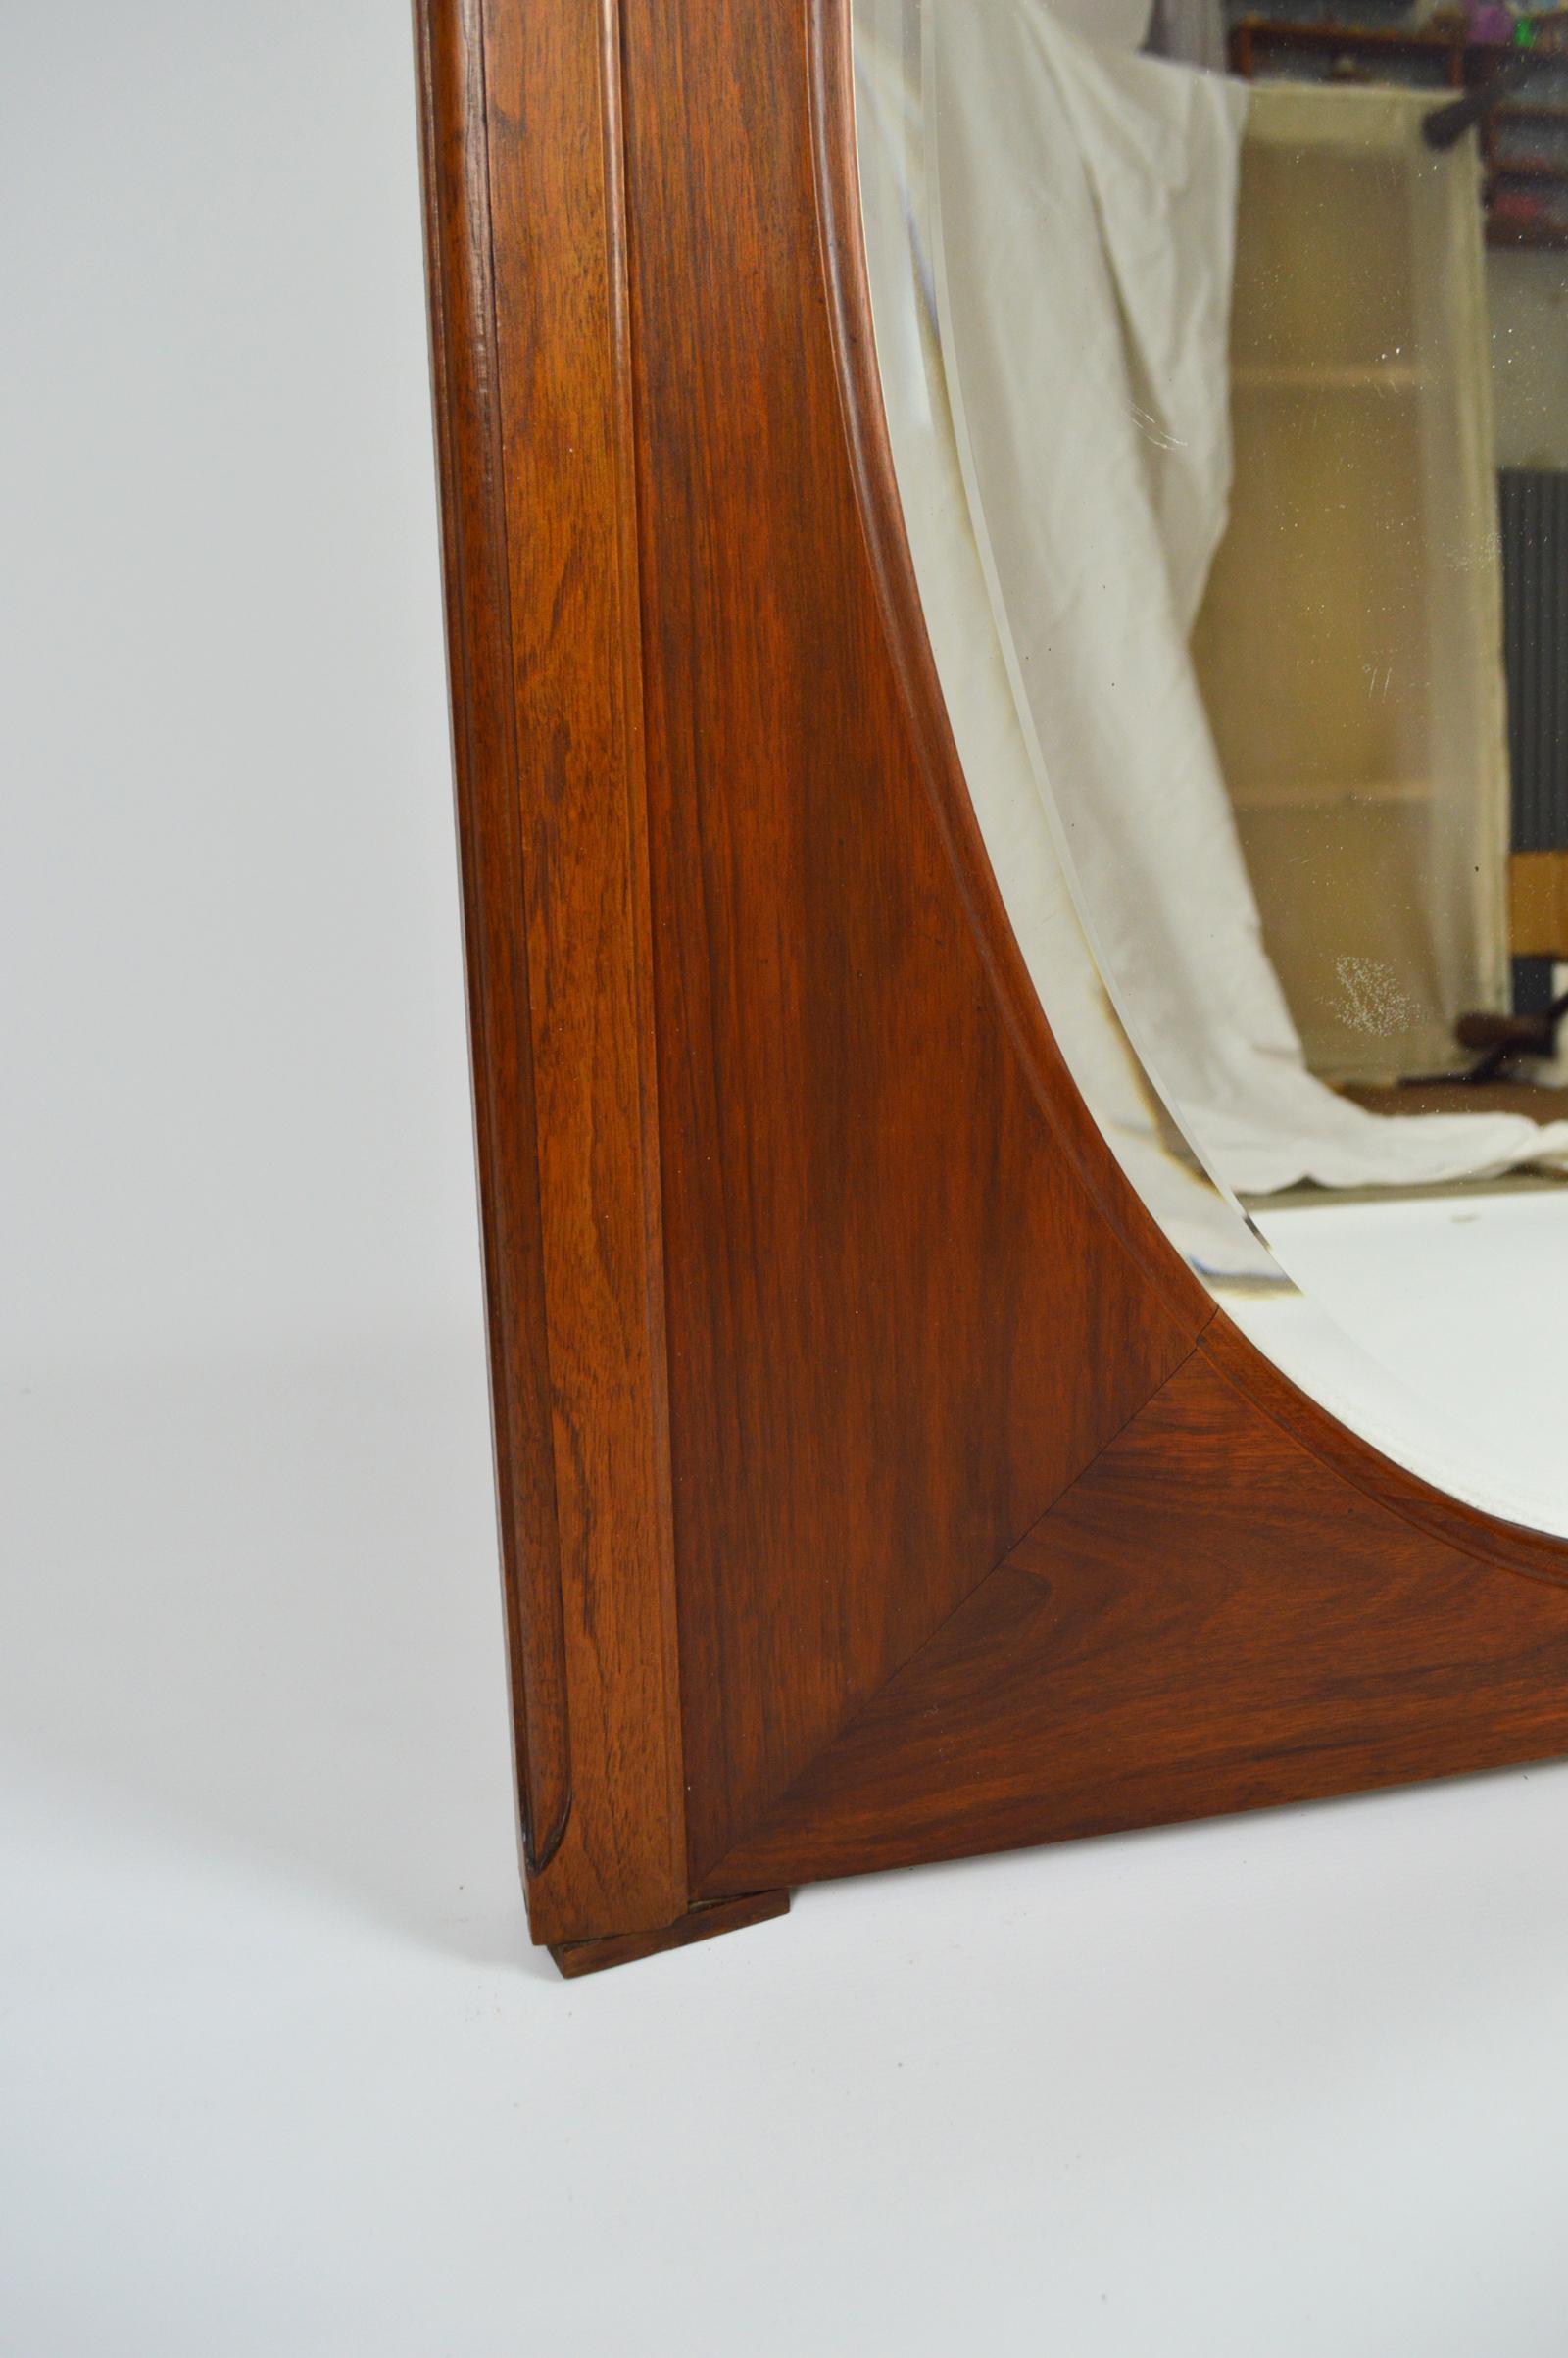 French Art Nouveau Fireplace Mantel Mirror, Carved Walnut on a Fruit Theme, 1910 For Sale 6